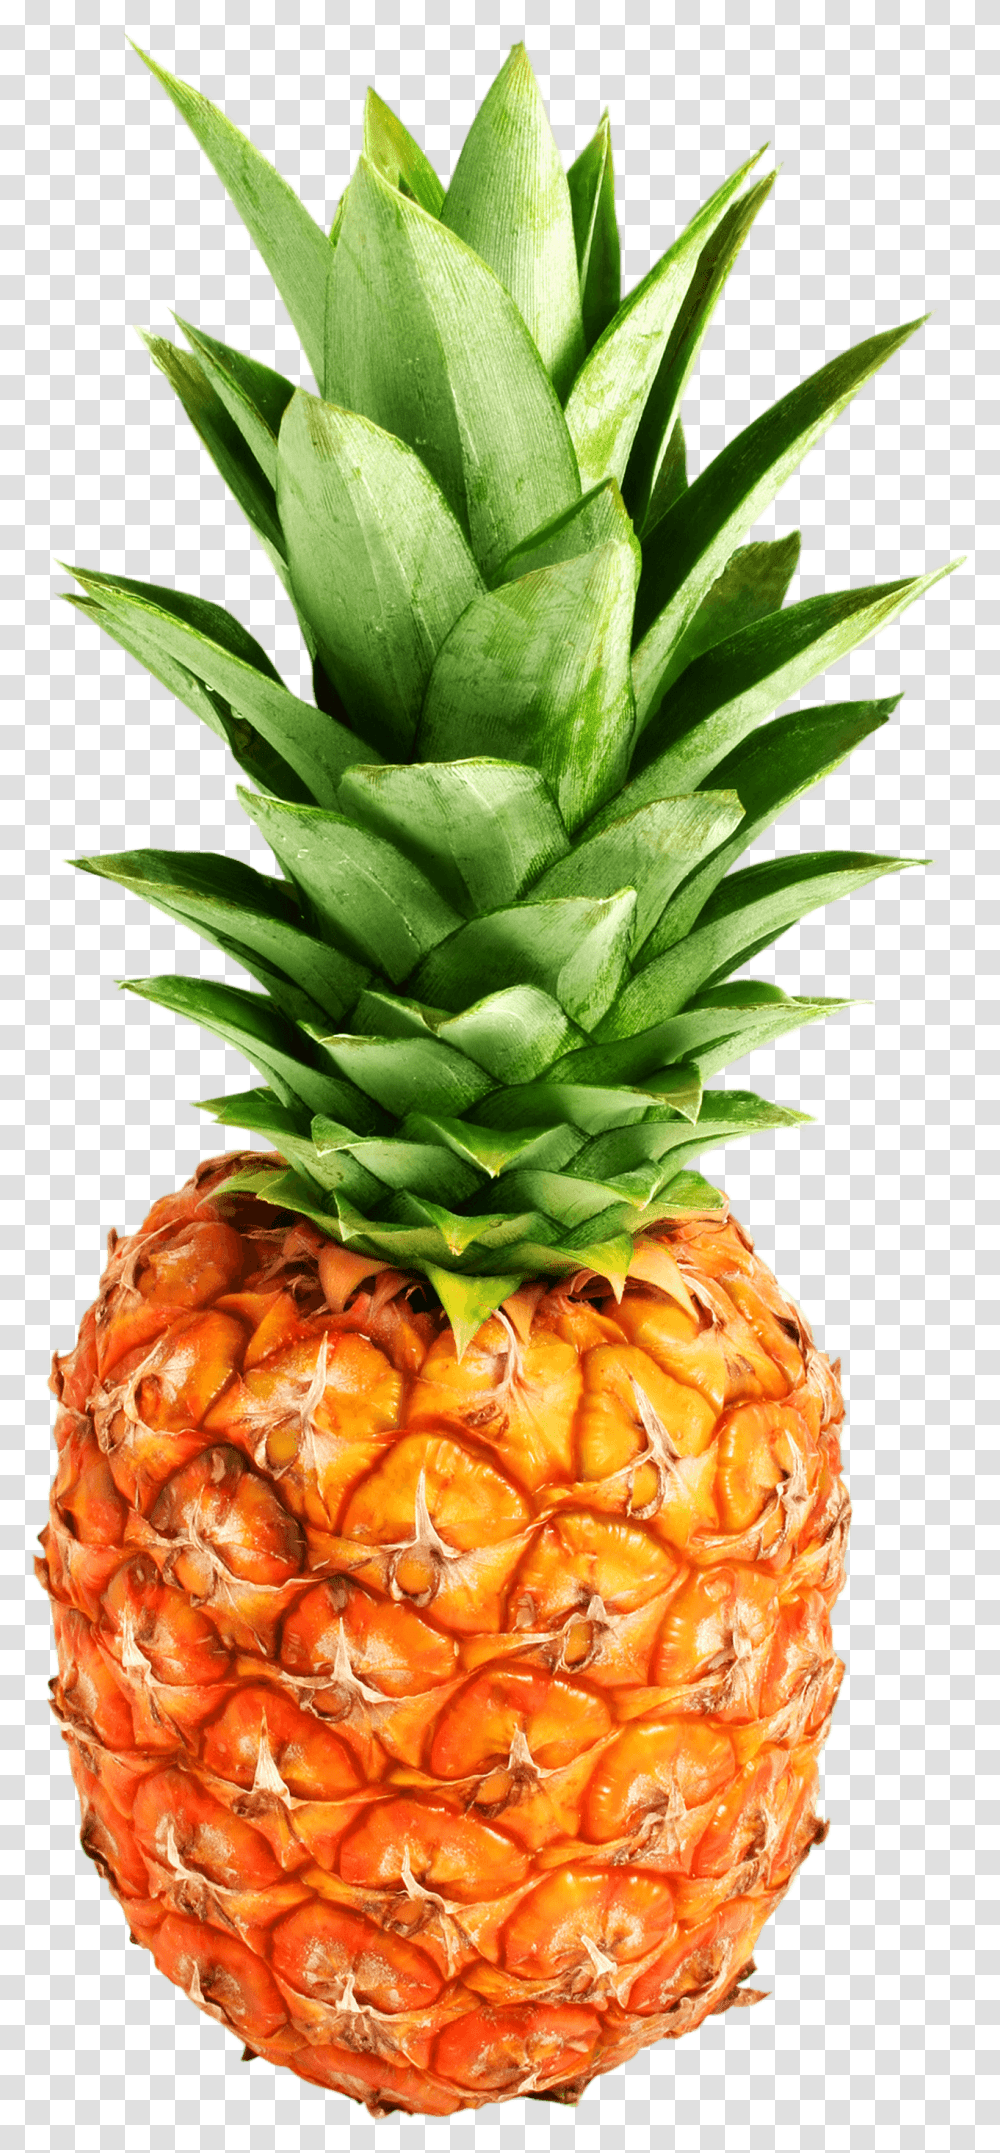 Pineapple Photo Pineapple, Fruit, Plant, Food Transparent Png